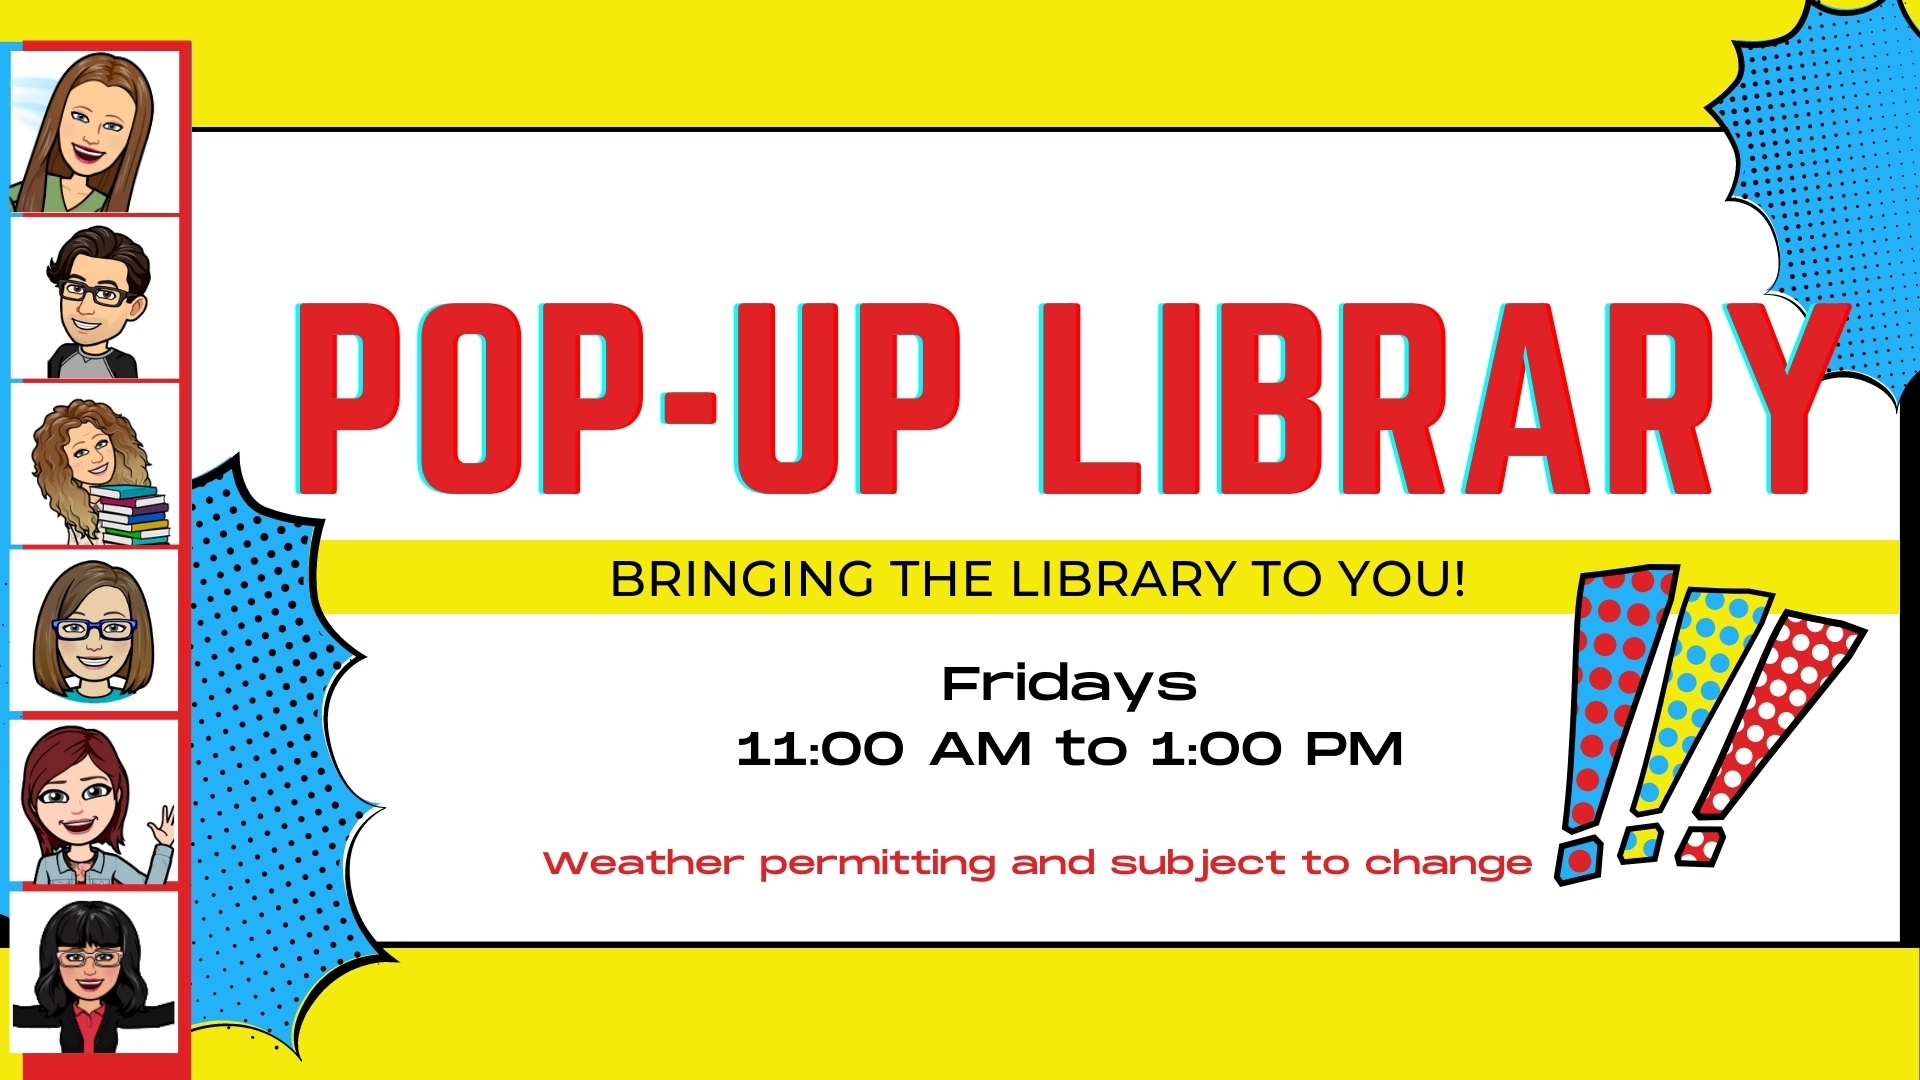 Pop-Up Library.  Bringing the Library to You.  Fridays 11 AM to 1 PM.  Weather permitting and subject to change